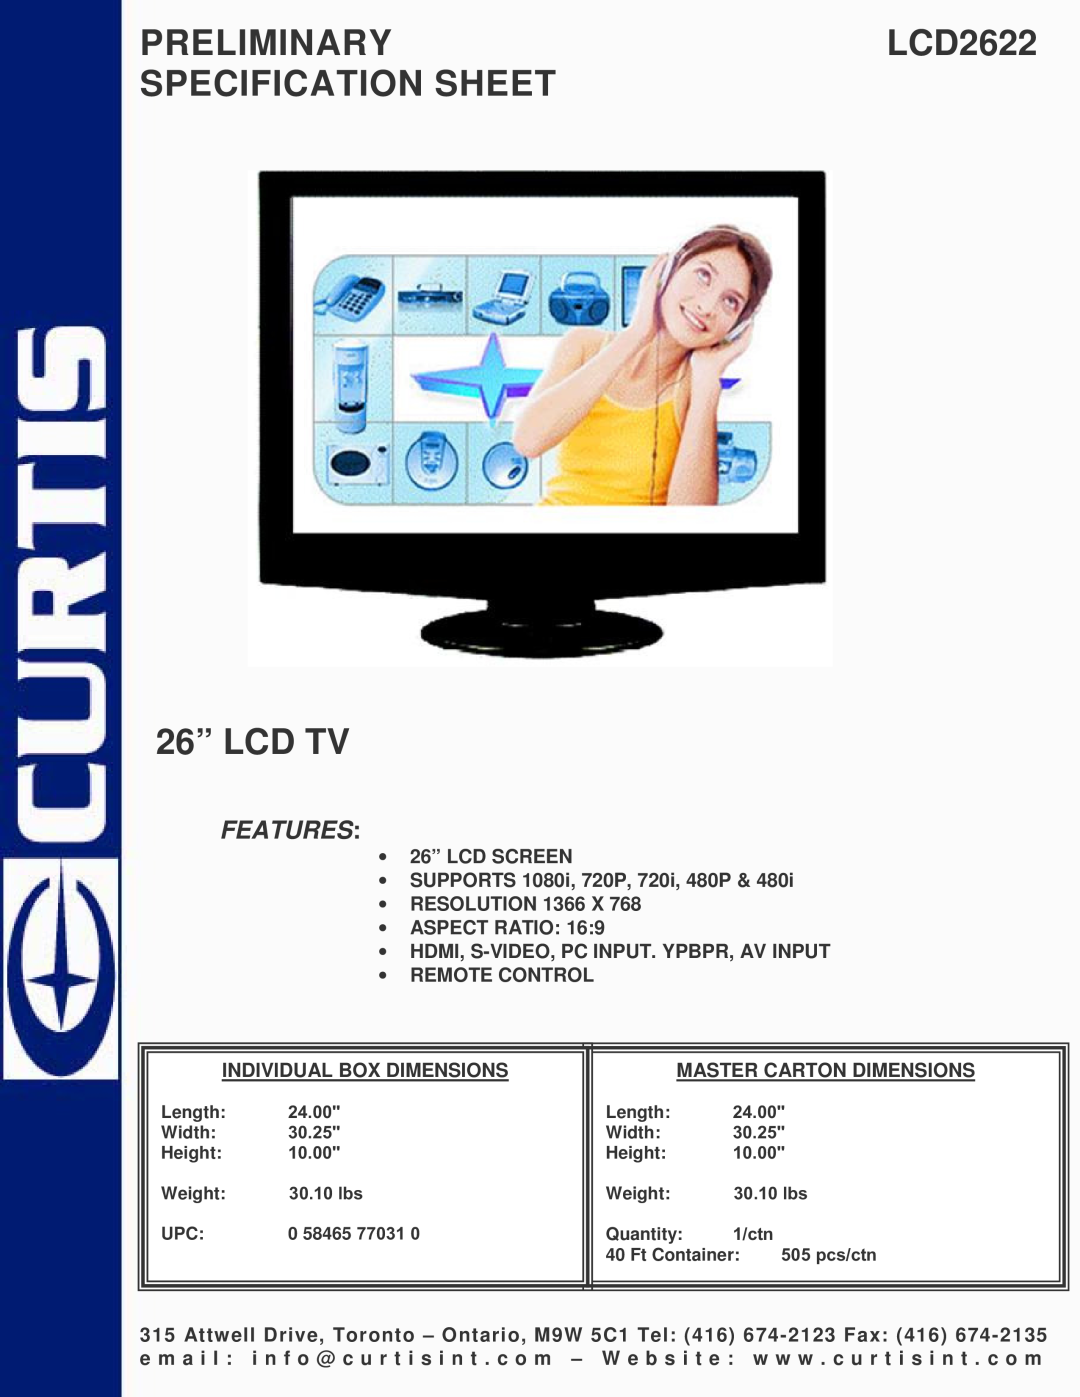 Curtis specifications PRELIMINARYLCD2622 SPECIFICATION SHEET 26” LCD TV, Features 